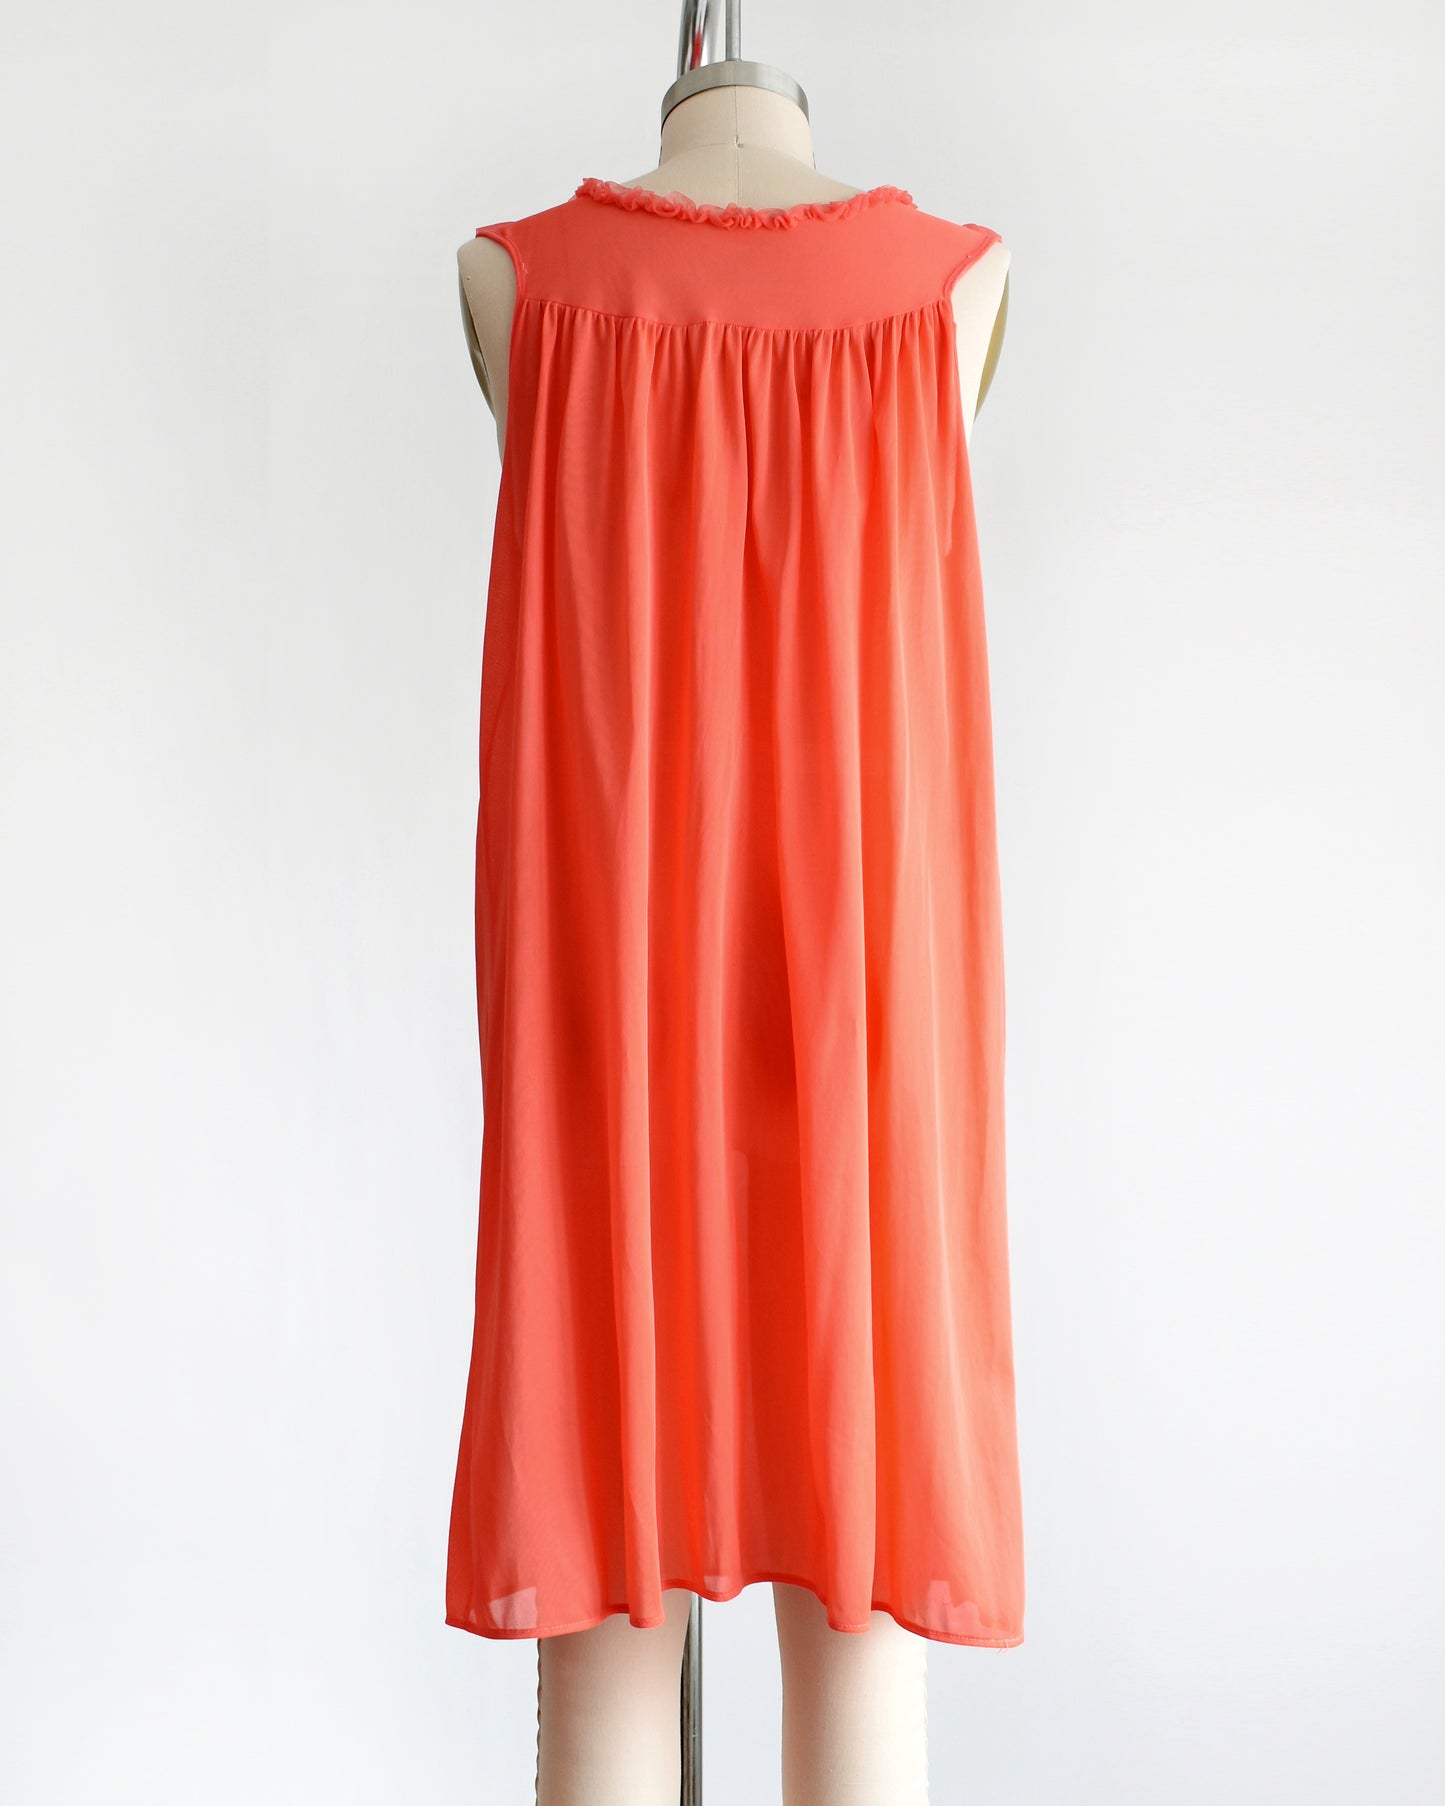 back view of a vintage 1960s/1970s hot coral ruffle nightie that has a ruffled neckline